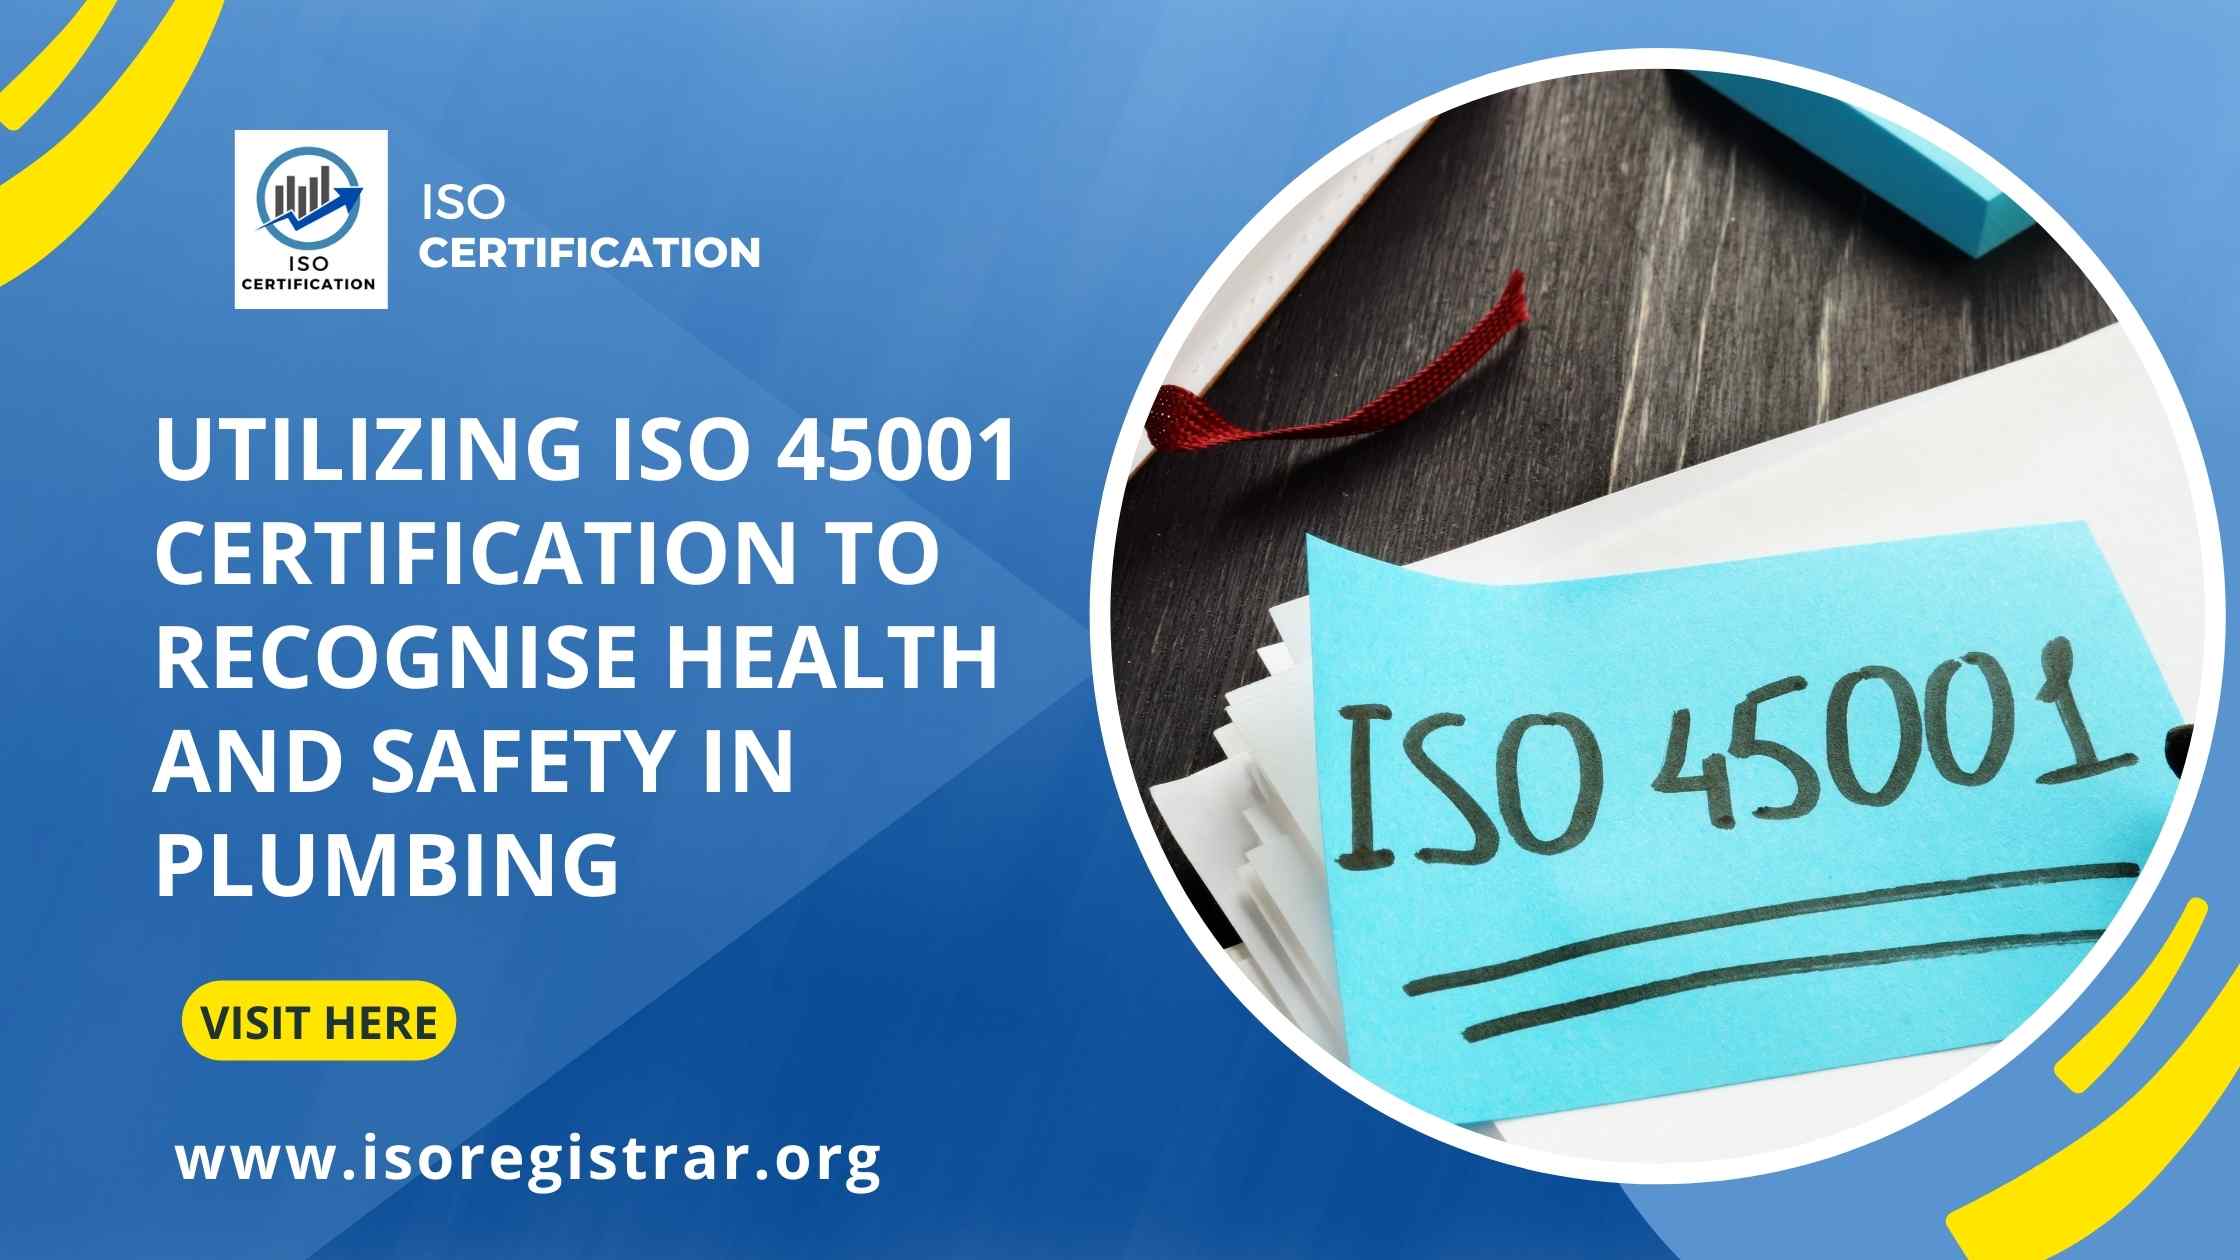 ISO 45001 Certification to Recognise Health and Safety in Plumbing